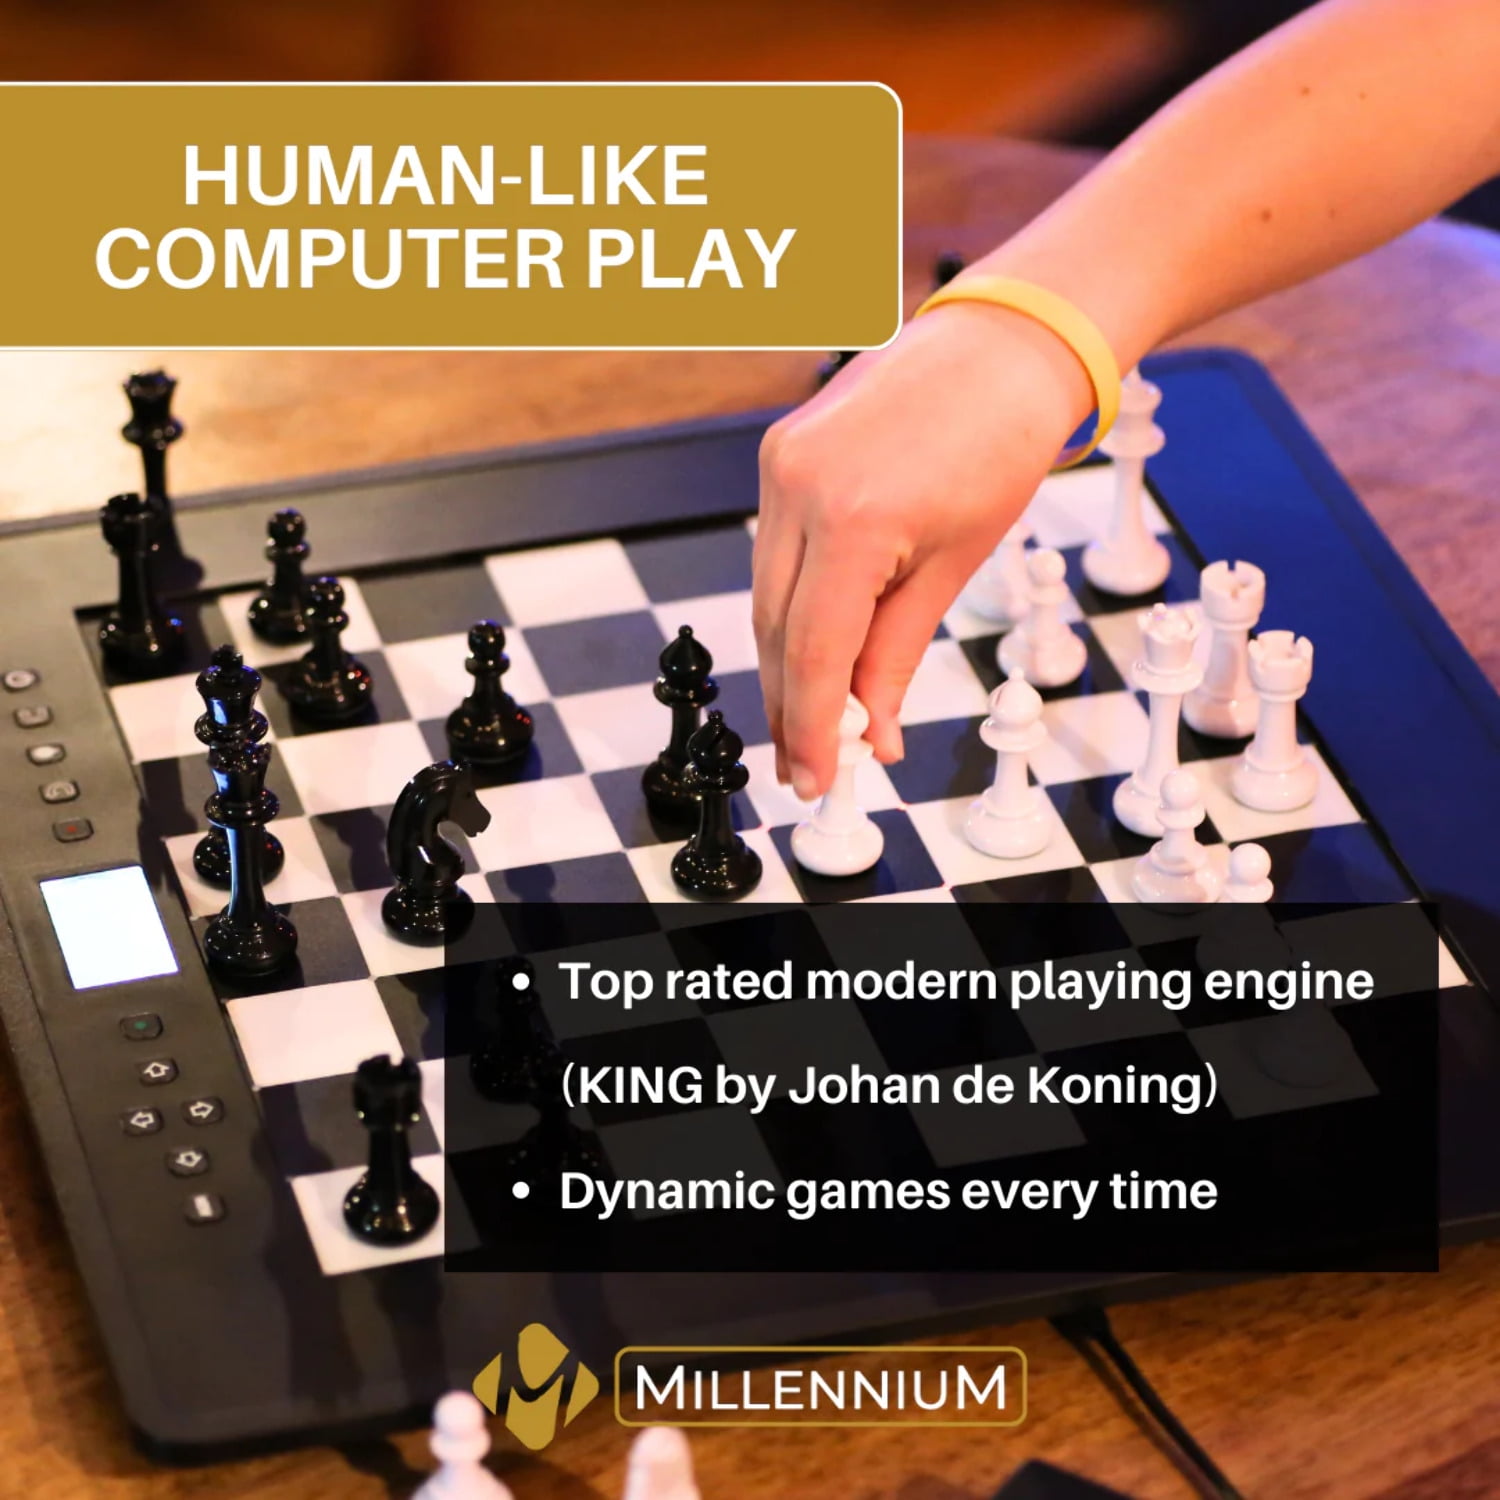  Millennium Chess Computer - The King Performance